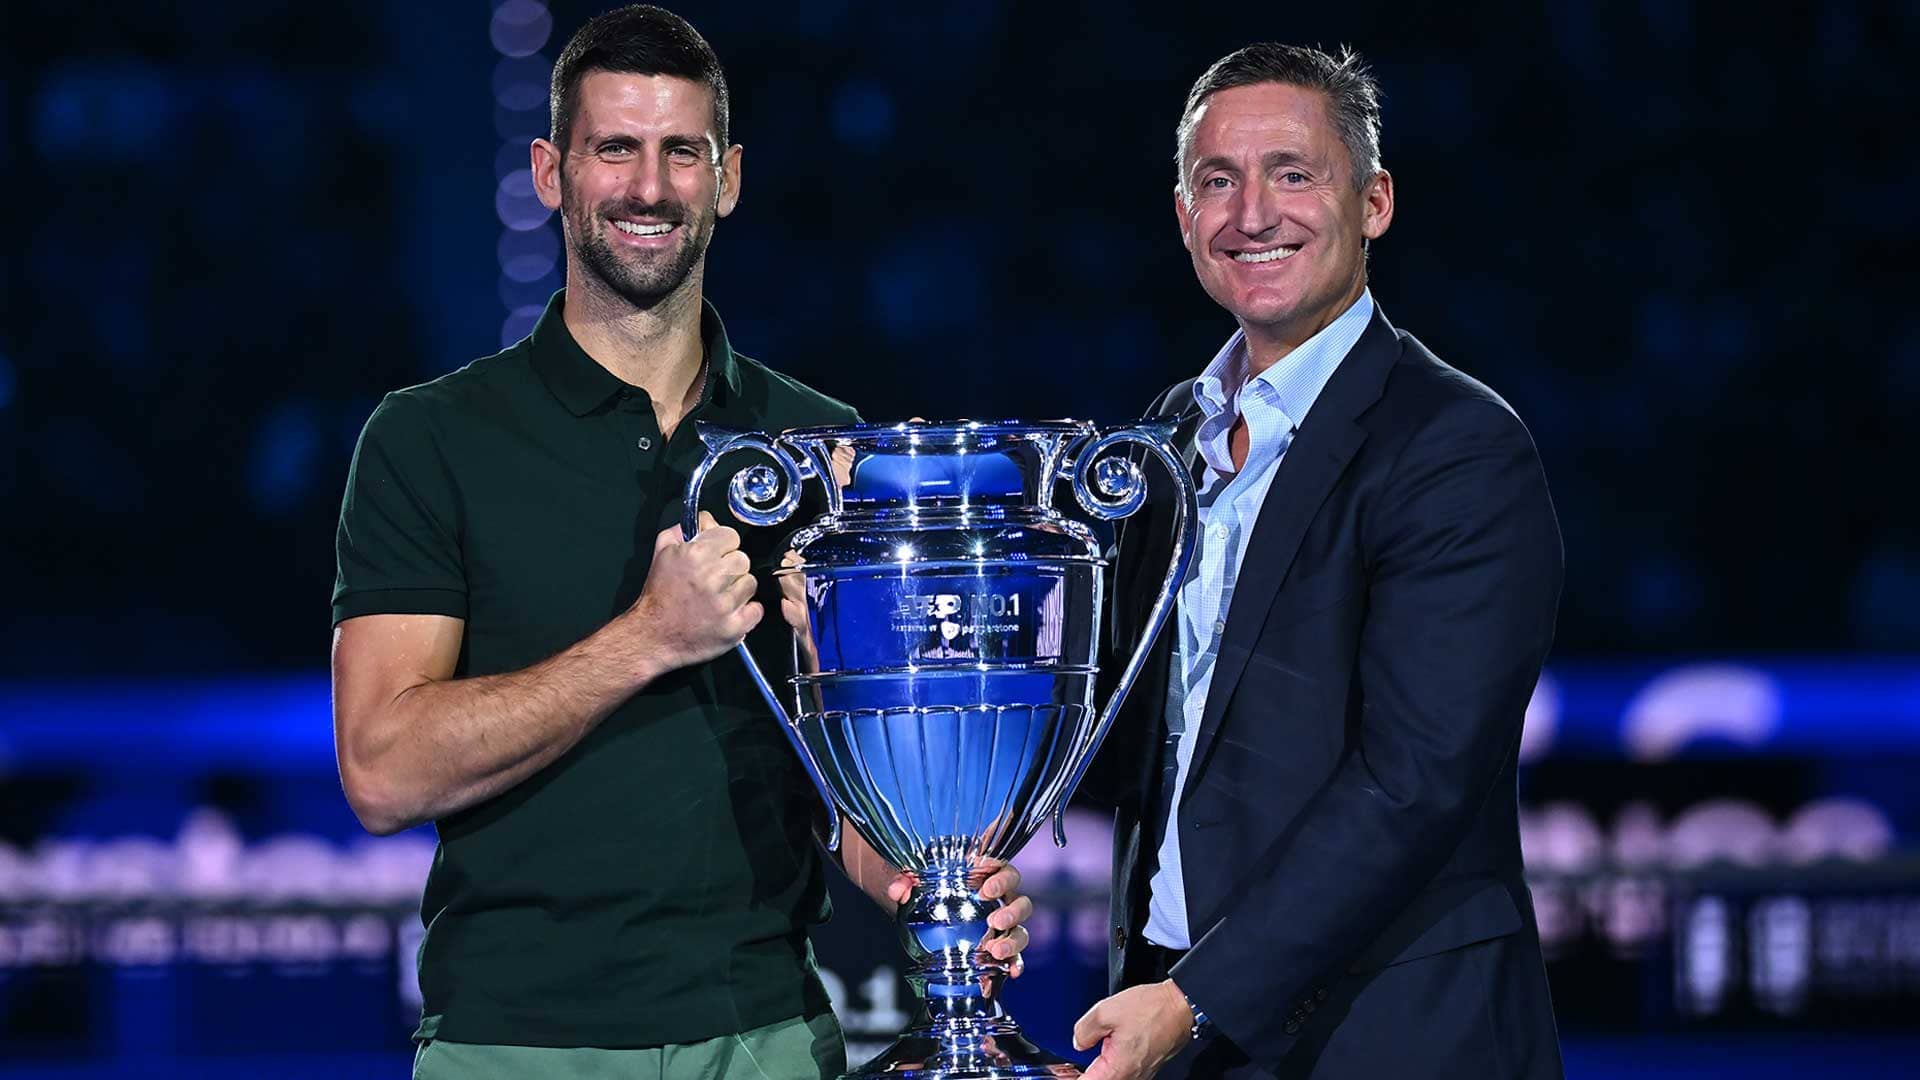 Novak Djokovic poses for a photo with ATP Chairman Andrea Gaudenzi to celebrate his 2023 ATP Year-End No. 1 presented by Pepperstone finish.